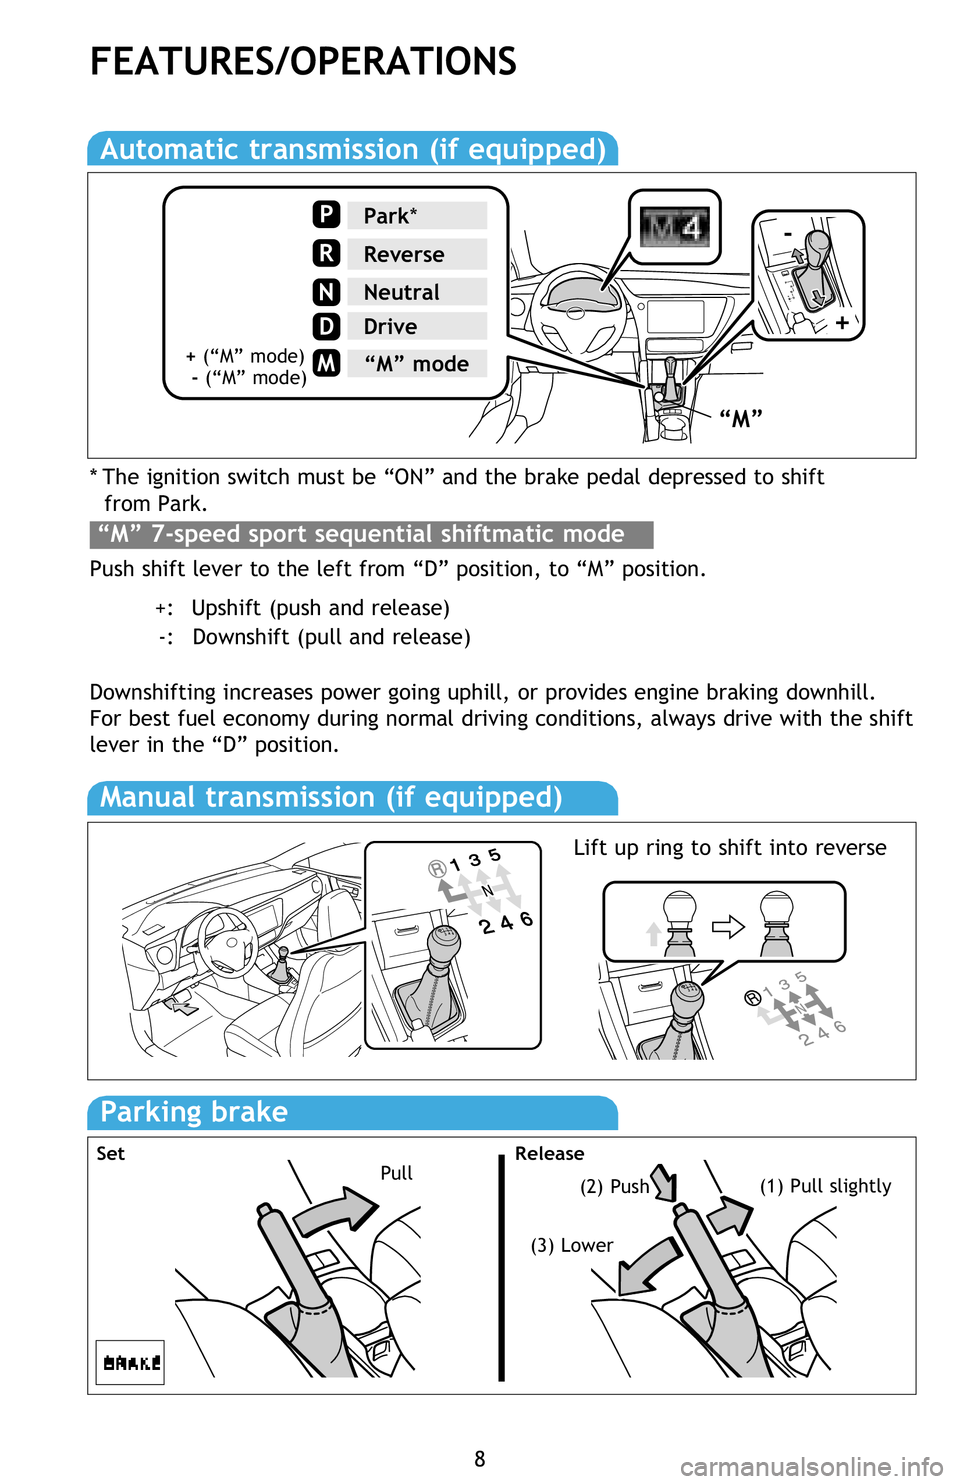 TOYOTA iM 2016  Owners Manual (in English) * The ignition switch must be “ON” and the brake pedal depressed to shift
  from Park.
Push shift lever to the left from “D” position, to “M” position.
         +:   Upshift (push and rele